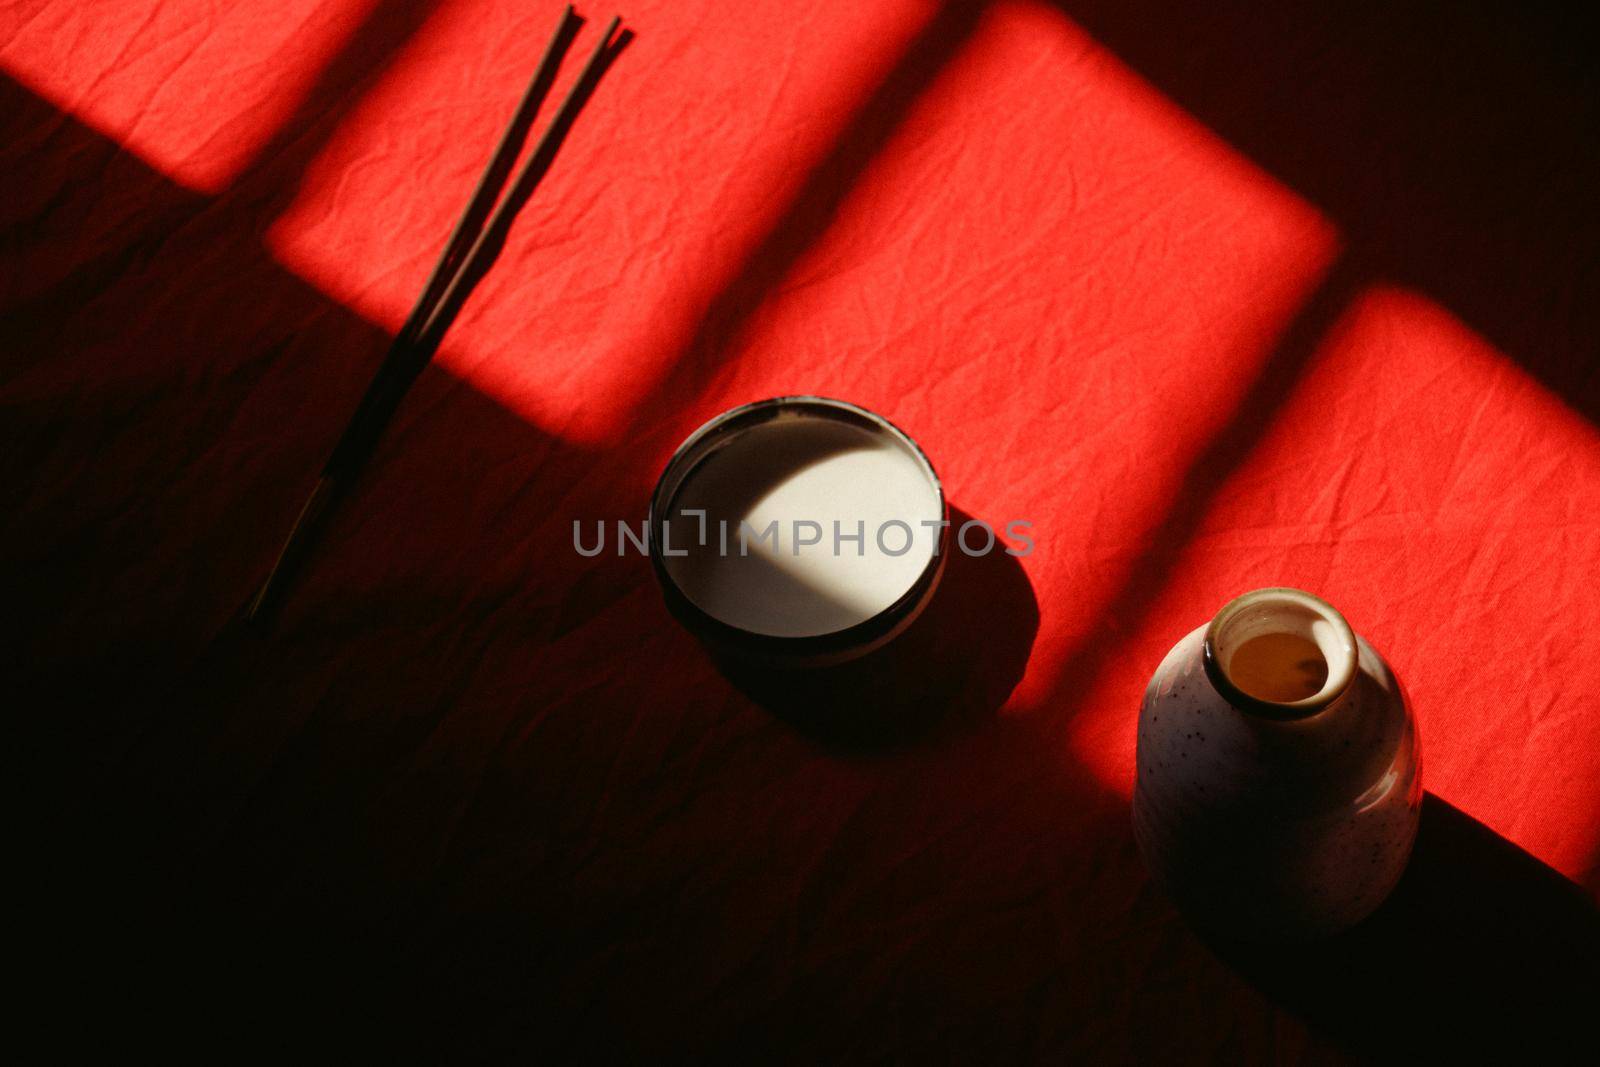 Light and shadows cast on ceramic incense holder by Sonnet15